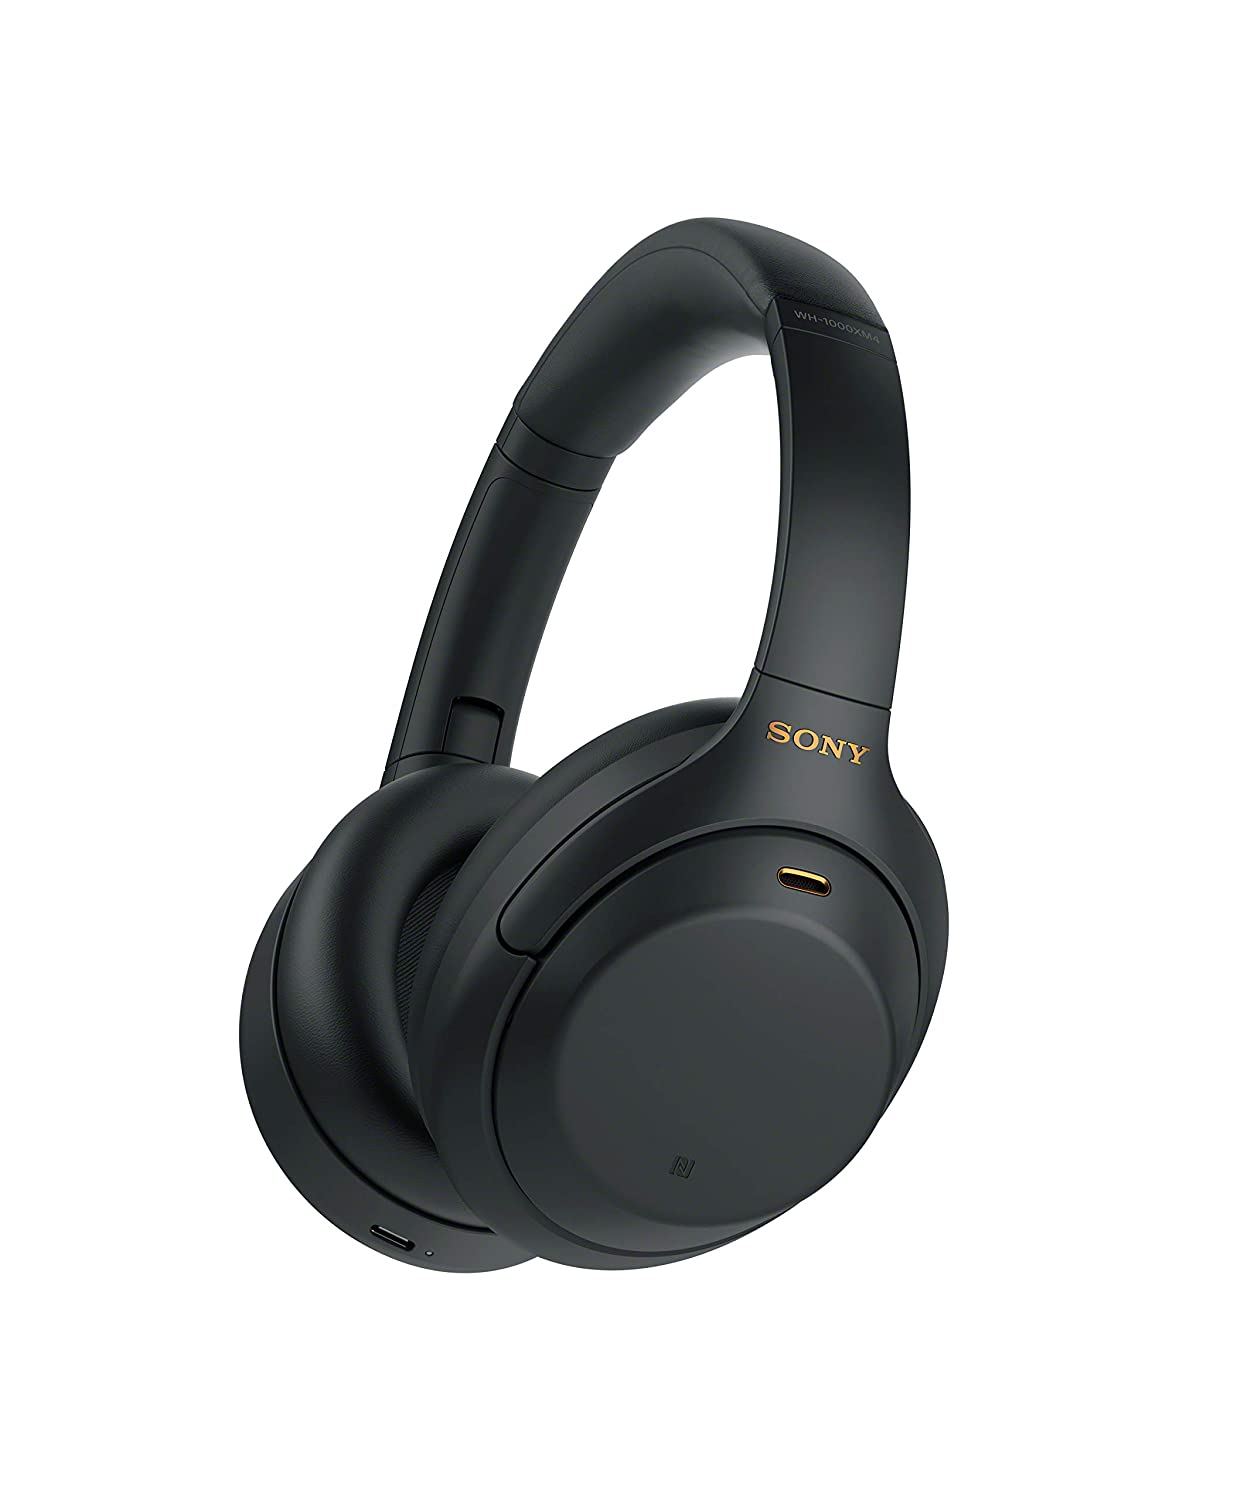 Sony WH-1000XM4 Industry Leading Wireless Noise Cancelling Headphones